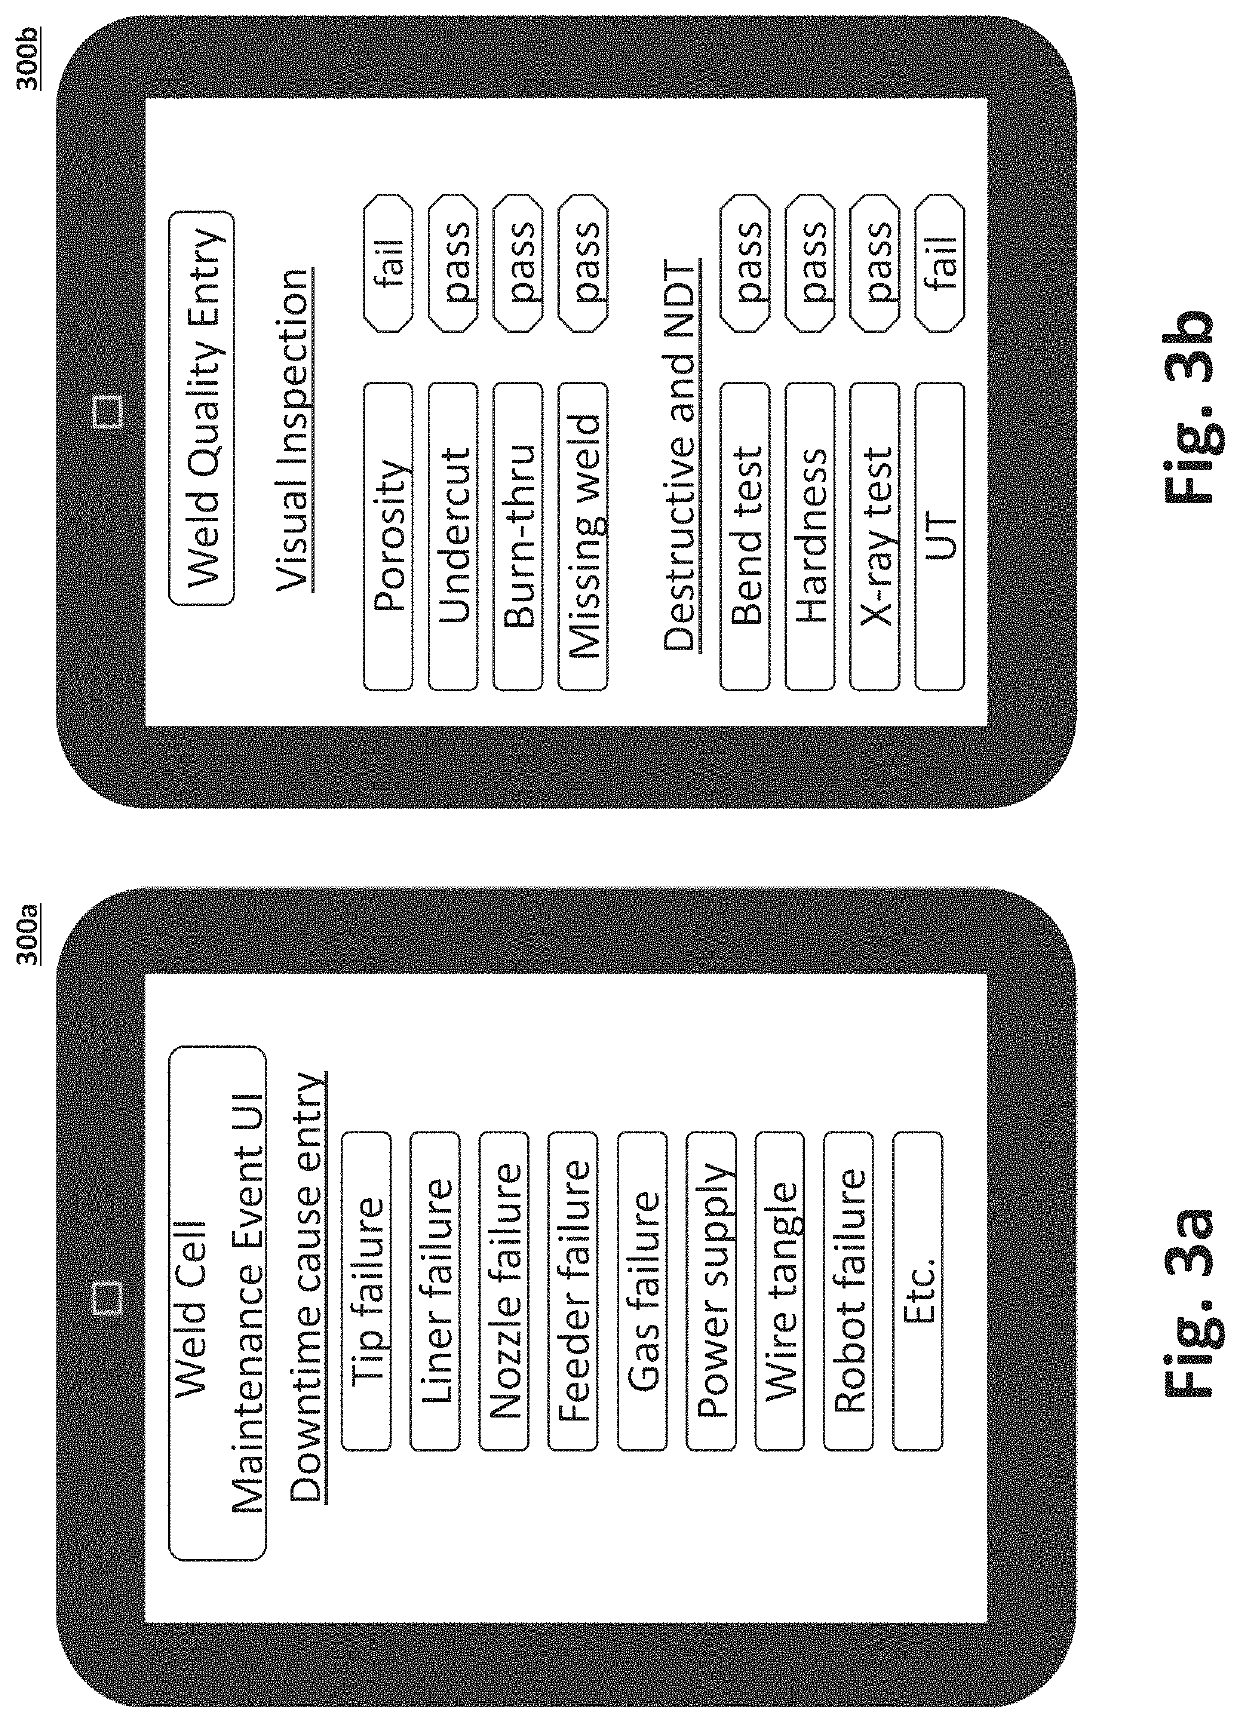 System and method to facilitate welding software as a service